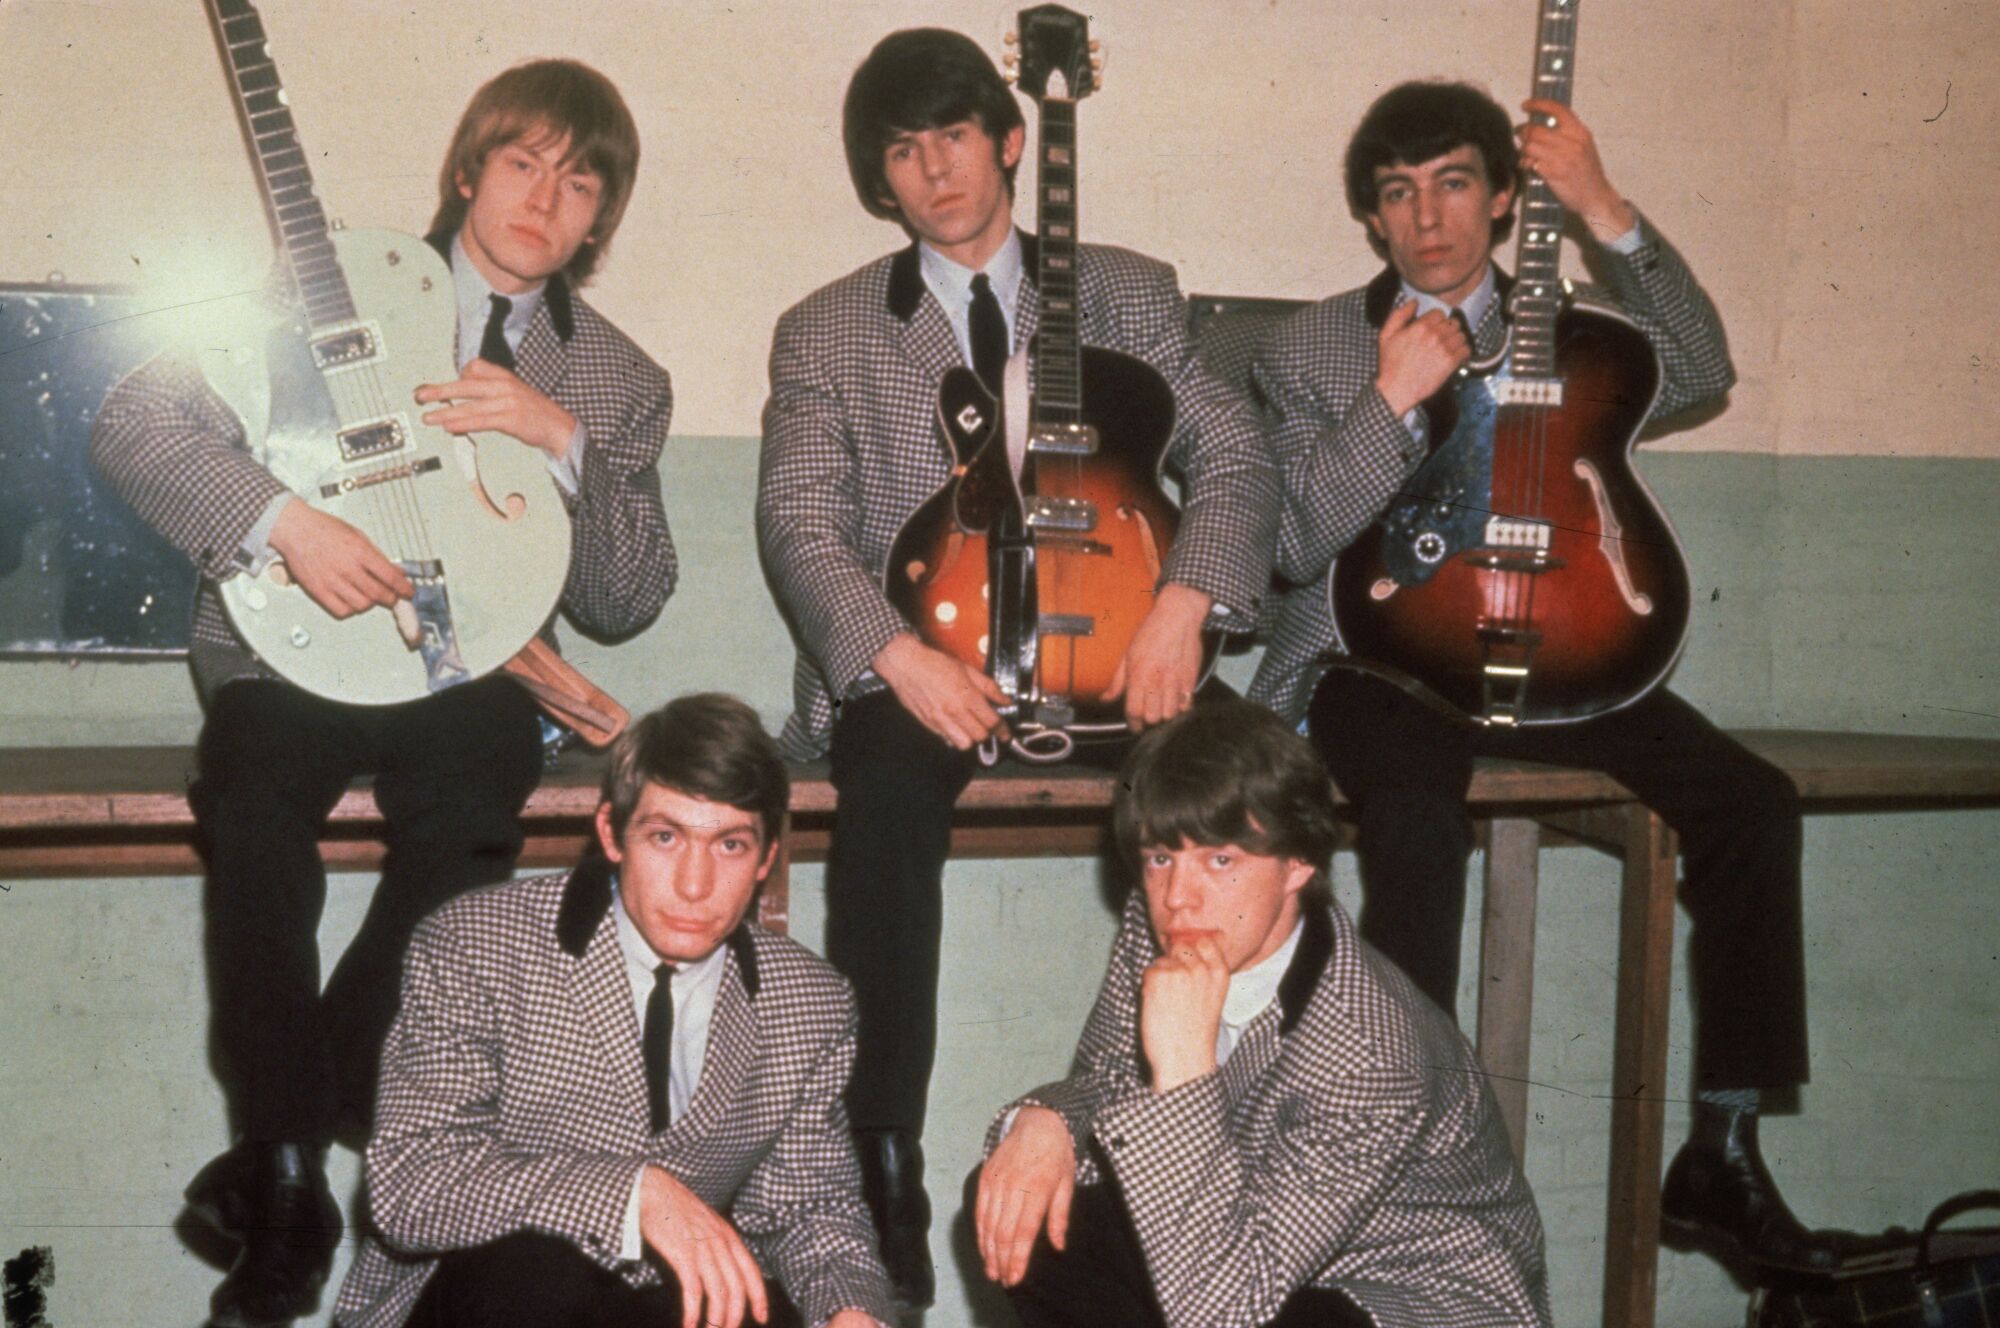 The Rolling Stones in 1964, wearing houndstooth suits, with three of them holding guitars.